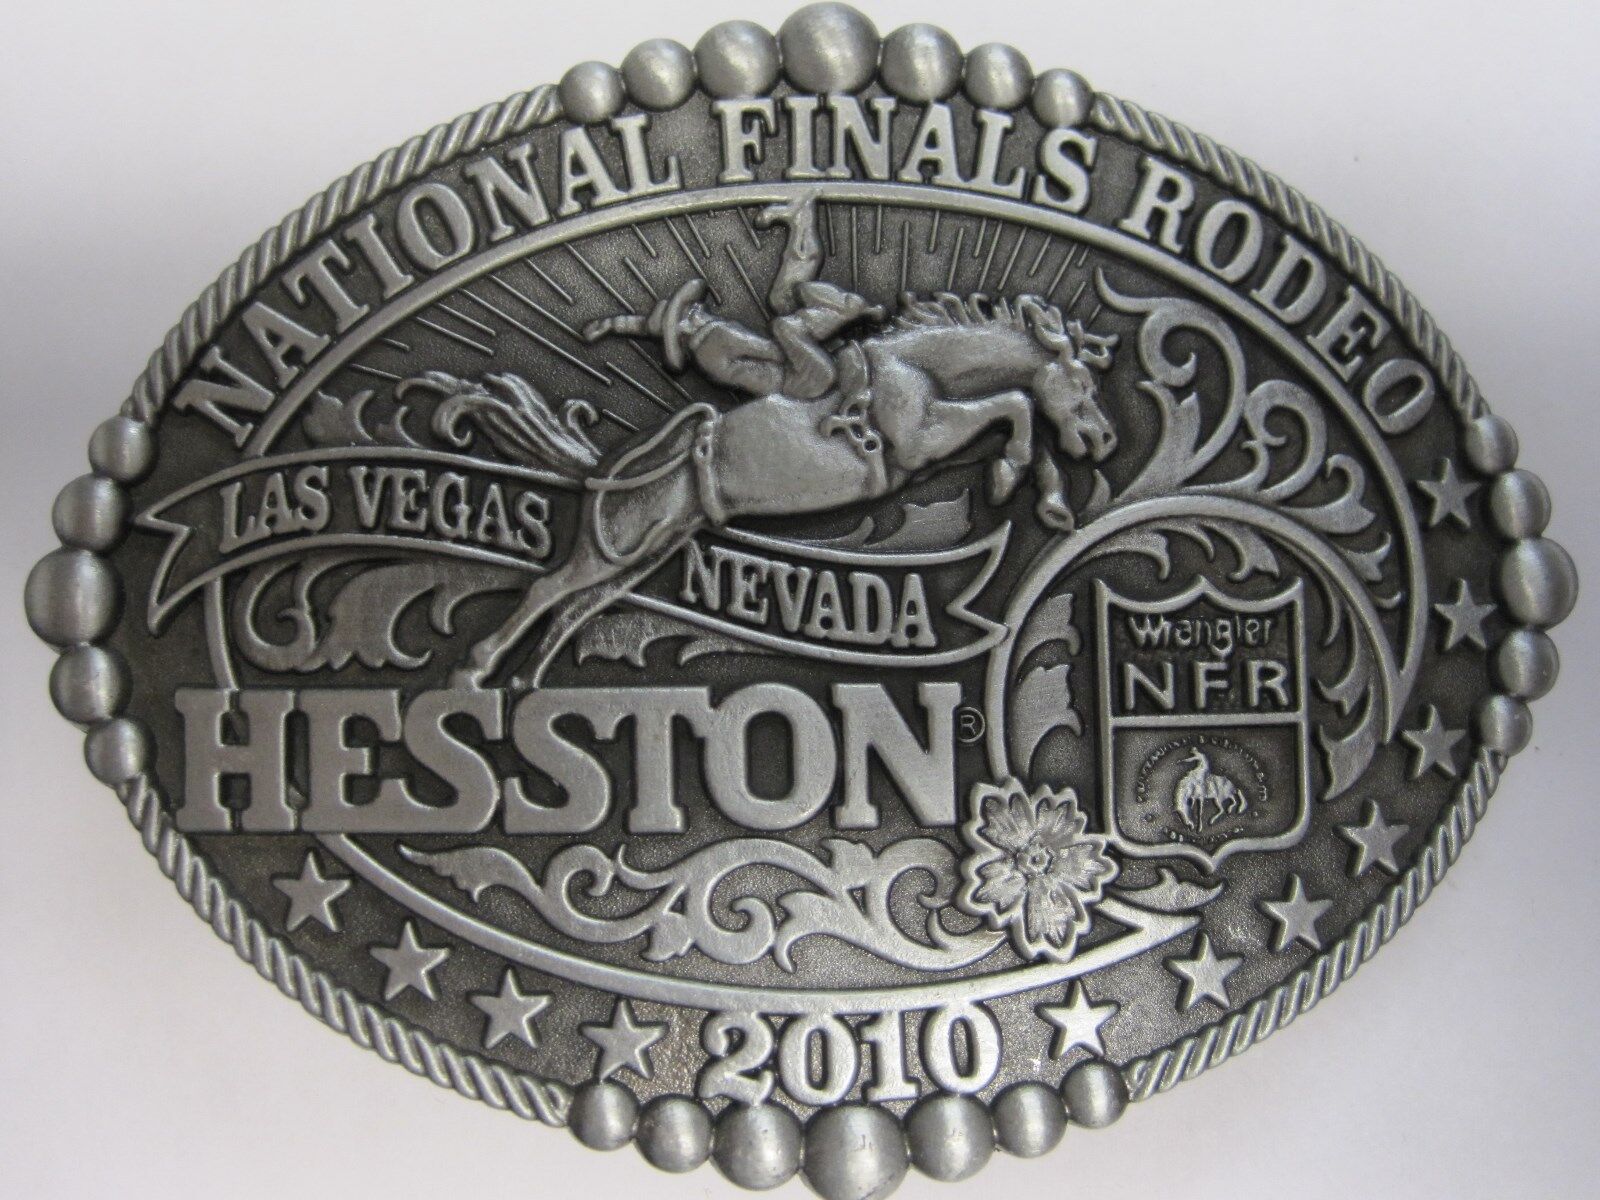 National Finals Rodeo Hesston 2010 NFR Adult Cowboy Buckle New AGCO PRCA Vegas